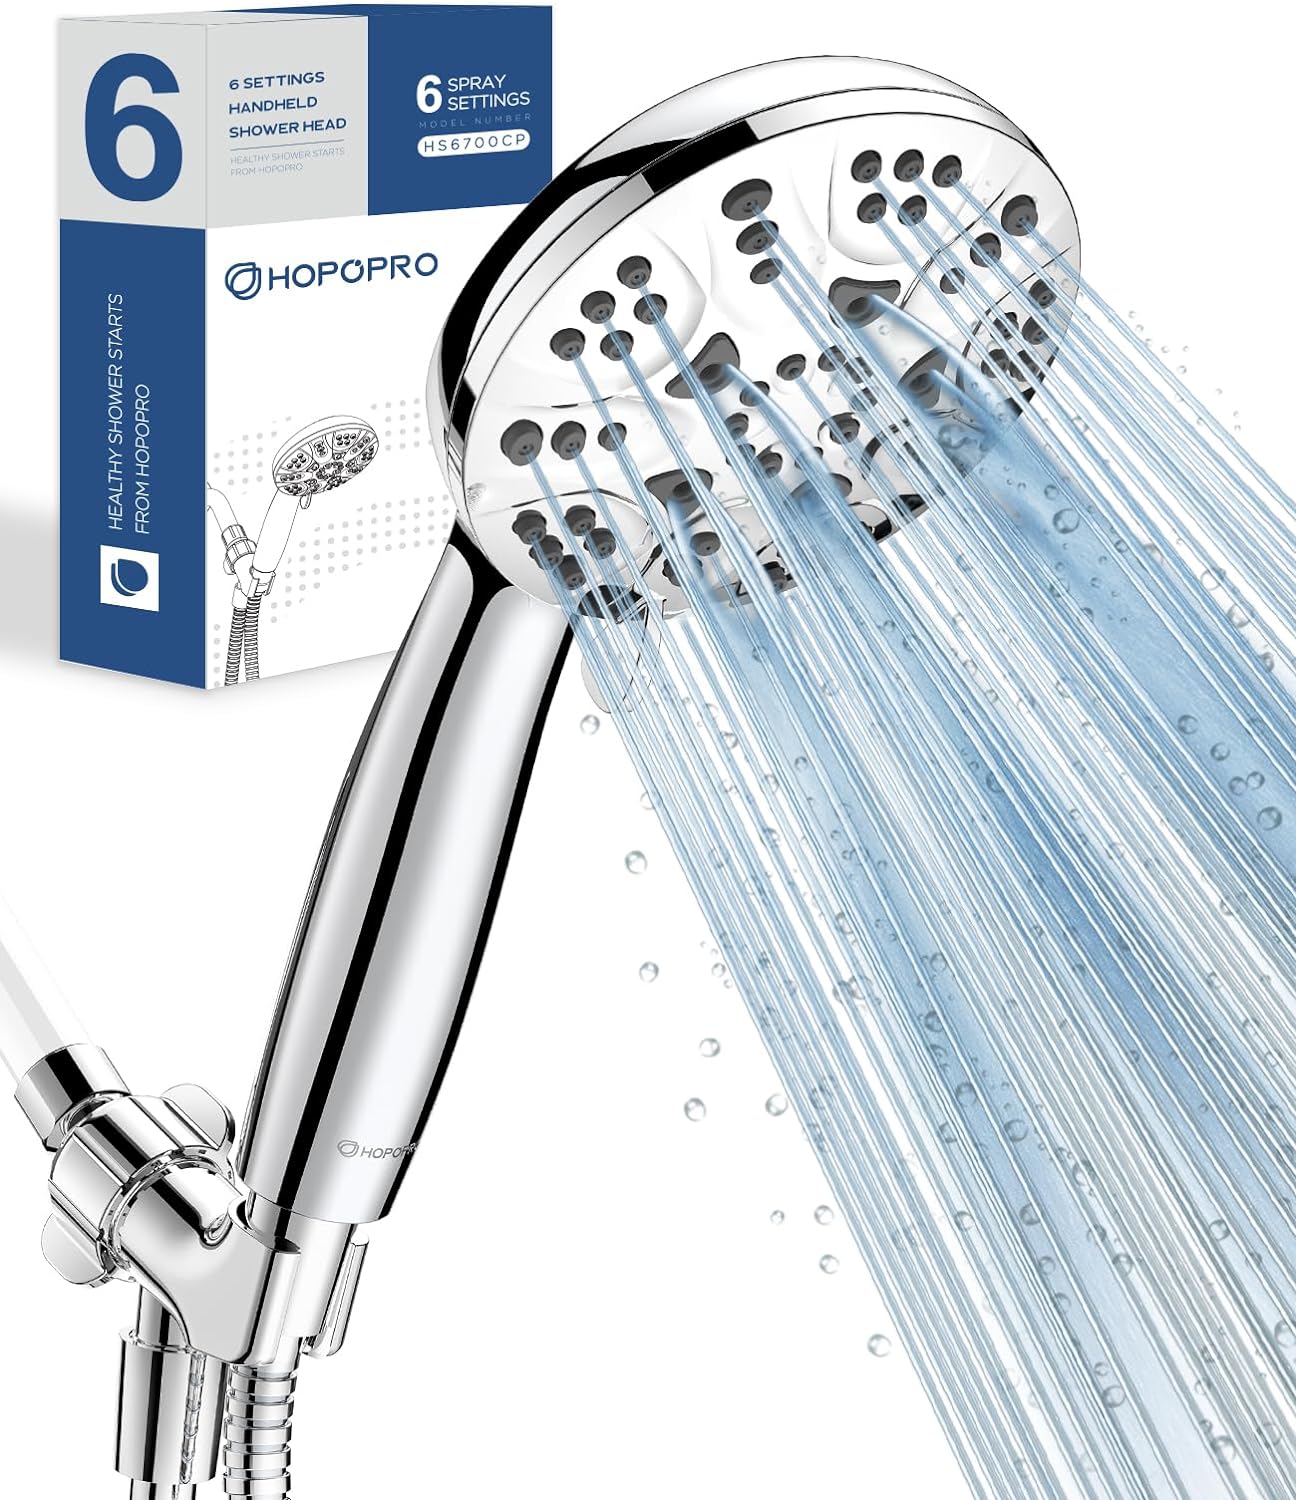 Ive been searching for a legitimate shower head  that has for real water pressure, look no further.. My house was built in the late 50s and Im sure the water pipes have seen their better days.. Quick and easy install, which was nice.. The wand tubing is very pliable and not rigid at all. I think the secret to this showerhead is the ability to remove the water flow screen that makes a huge difference for the amount of pressure that comes from your showerhead. The price point is an added bonu